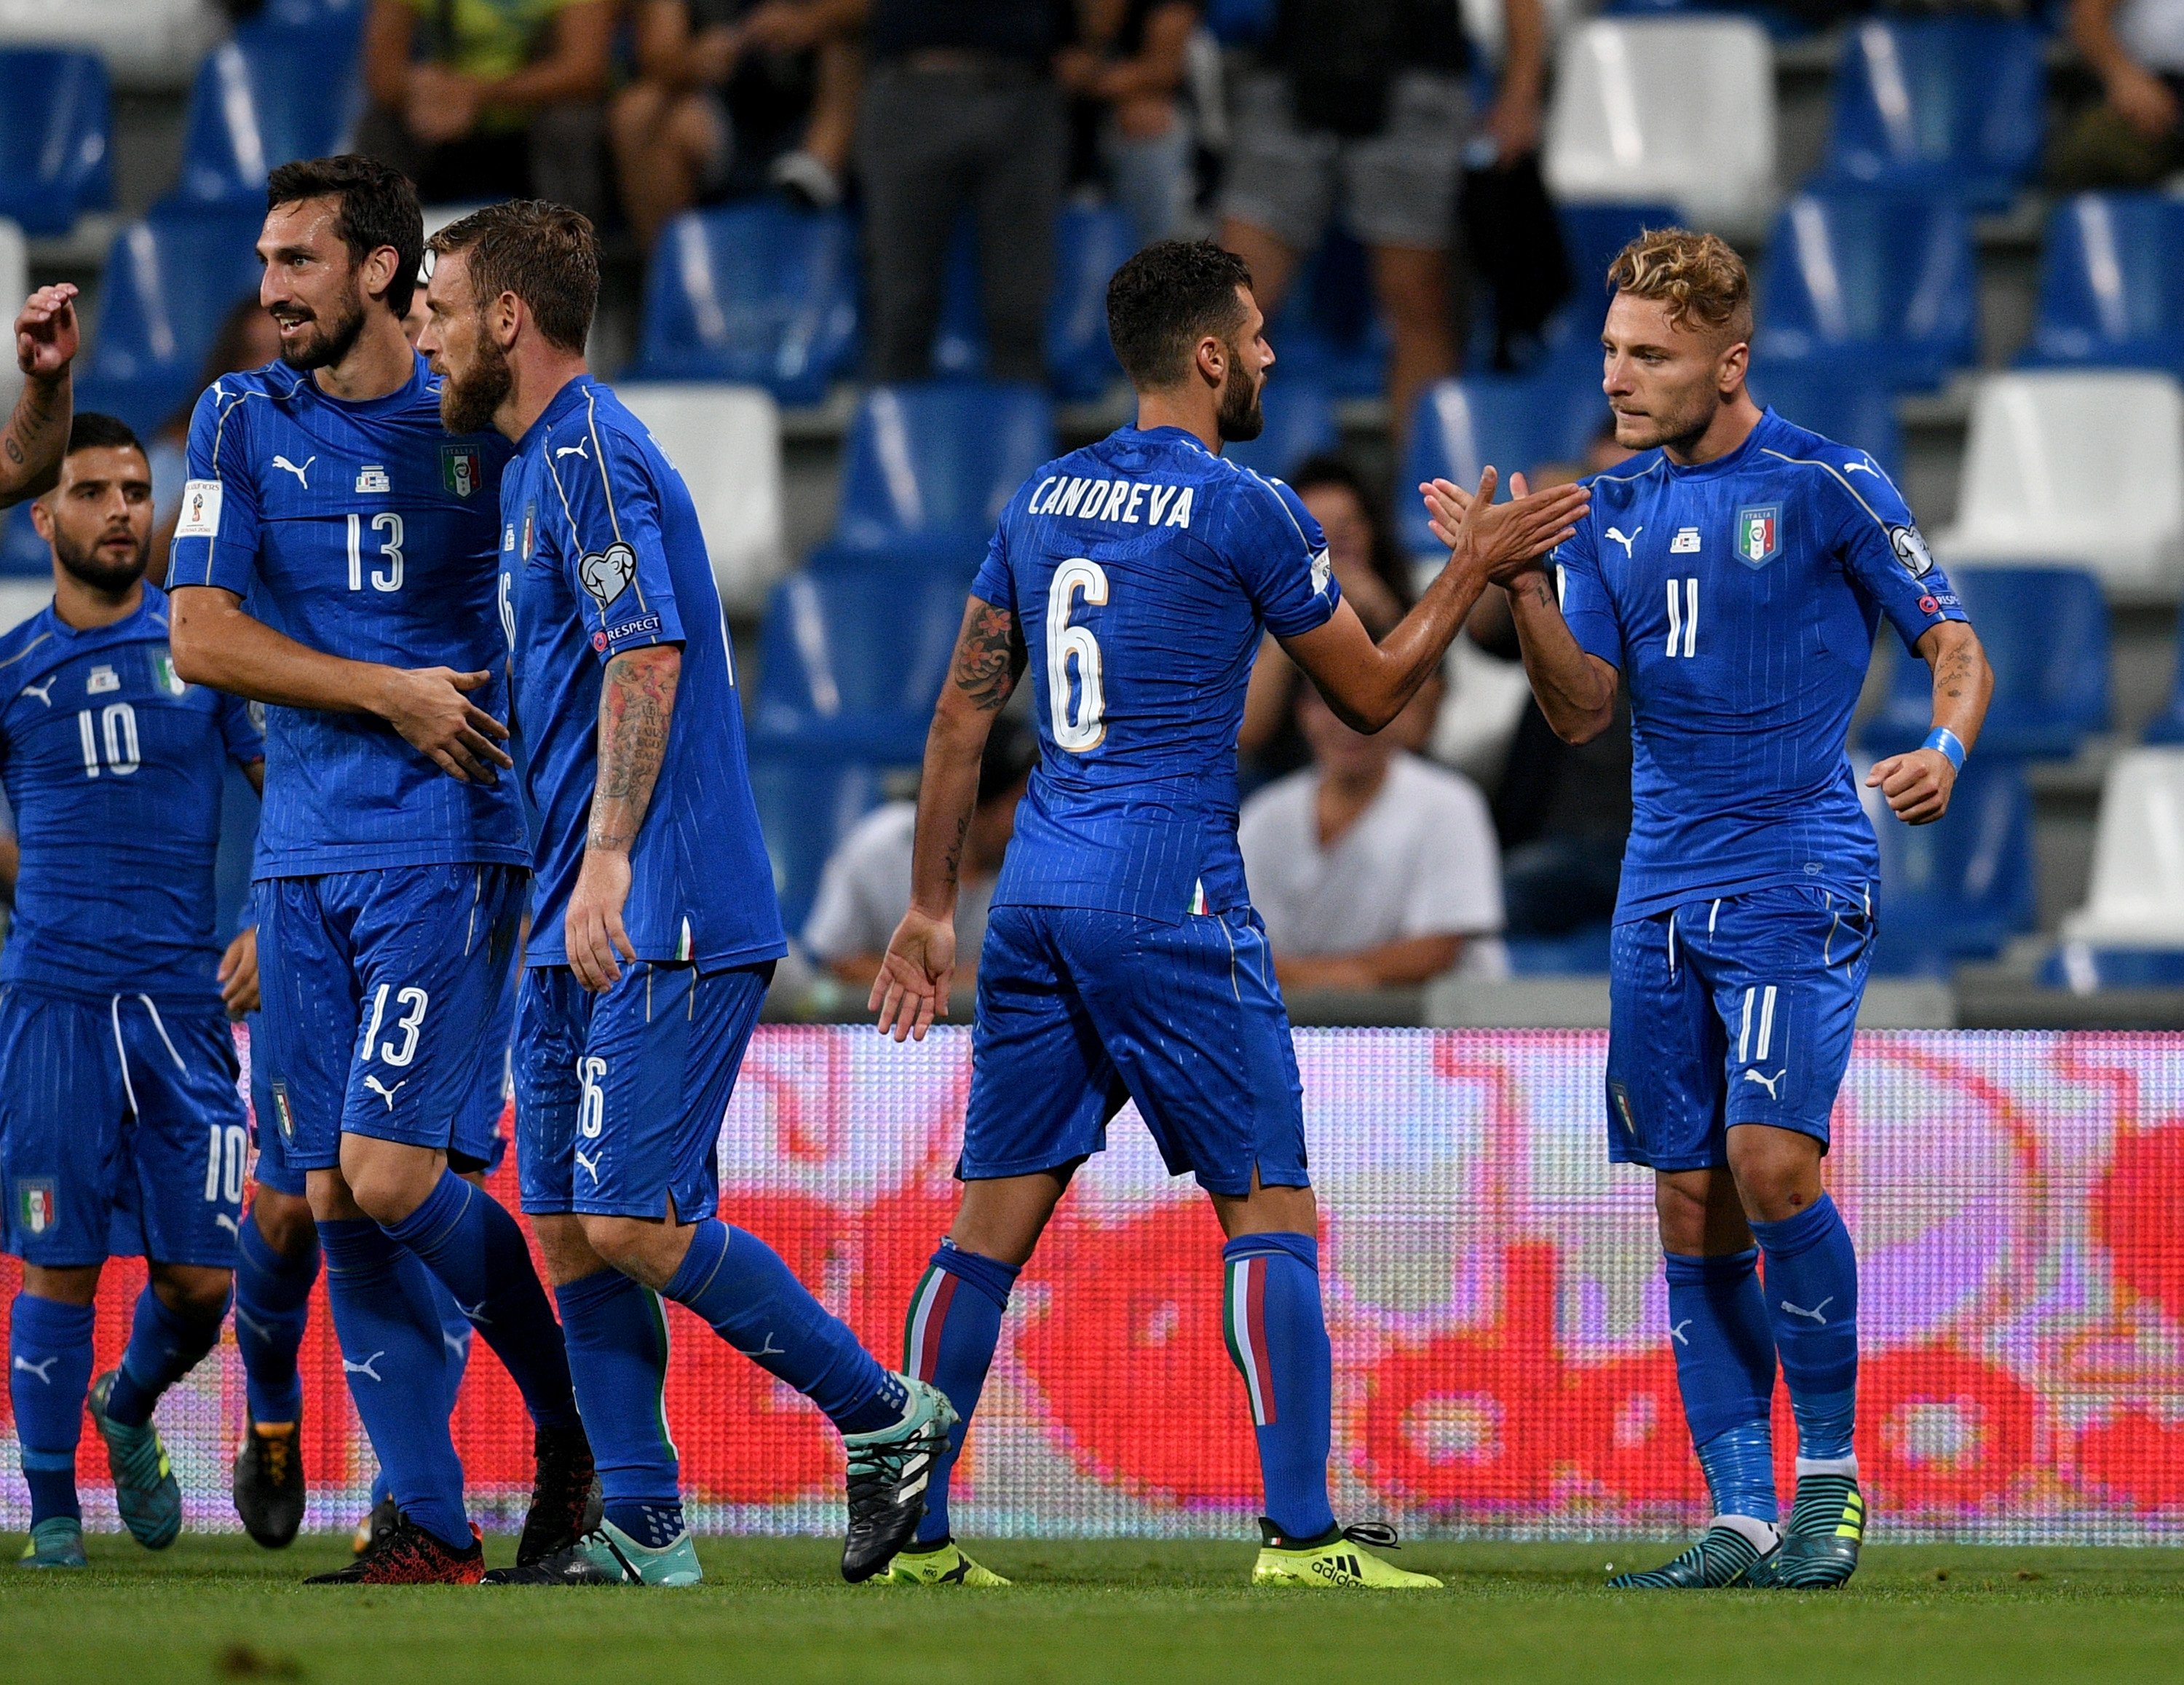 REGGIO NELL'EMILIA, ITALY - SEPTEMBER 05:  Ciro Immobile of Italy (R) celebrates after scoring the opening goal during the FIFA 2018 World Cup Qualifier between Italy and Israel at Mapei Stadium - Citta' del Tricolore on September 5, 2017 in Reggio nell'Emilia, Italy.  (Photo by Claudio Villa/Getty Images)